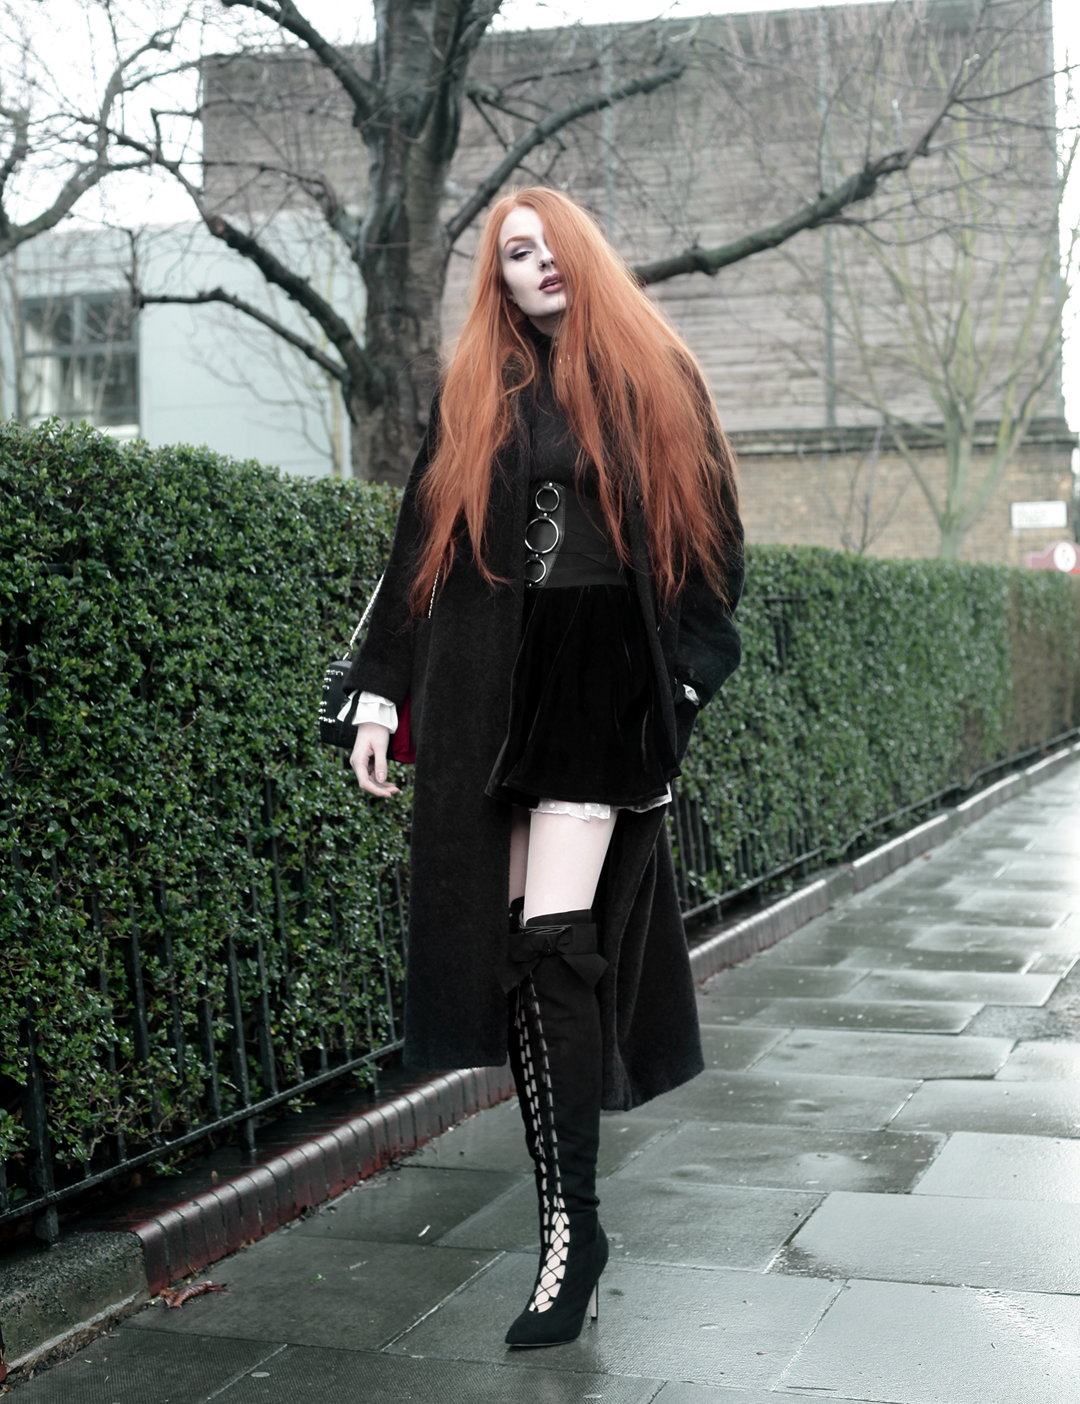 Olivia Emily wears Skinny Bags Dark Thoughts Clutch, Vintage Max Mara coat, Asos Lace Up Boots, and Asos Corset Belt.